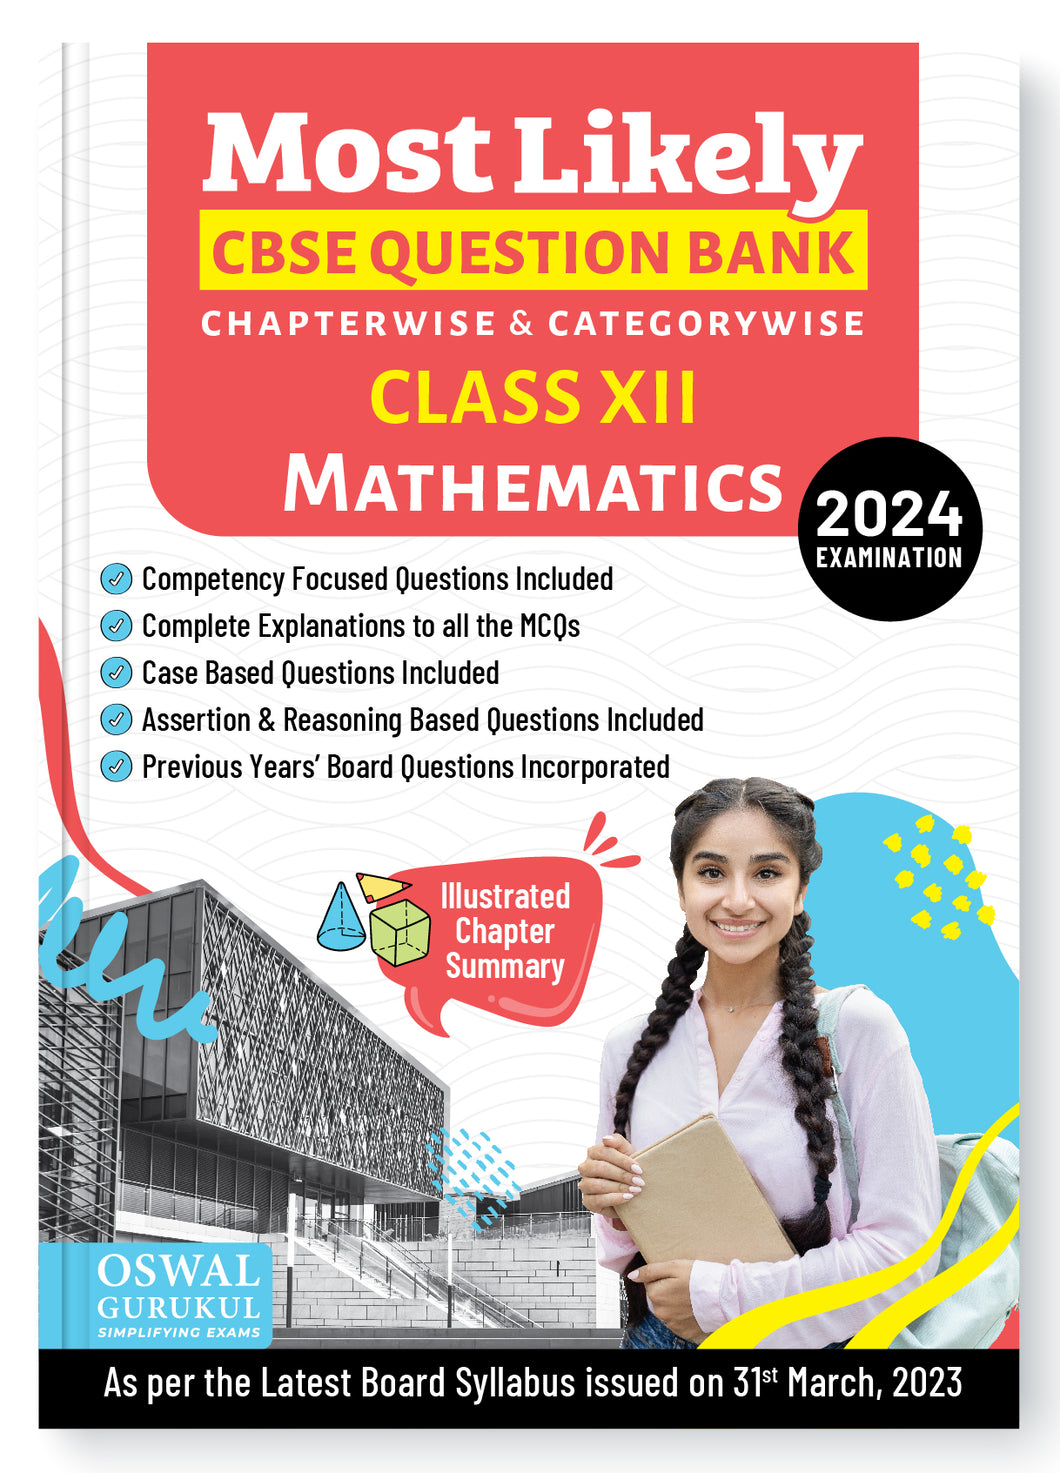 Oswal - Gurukul Mathematics Most Likely Question Bank : CBSE Class 12 for 2024 Exam